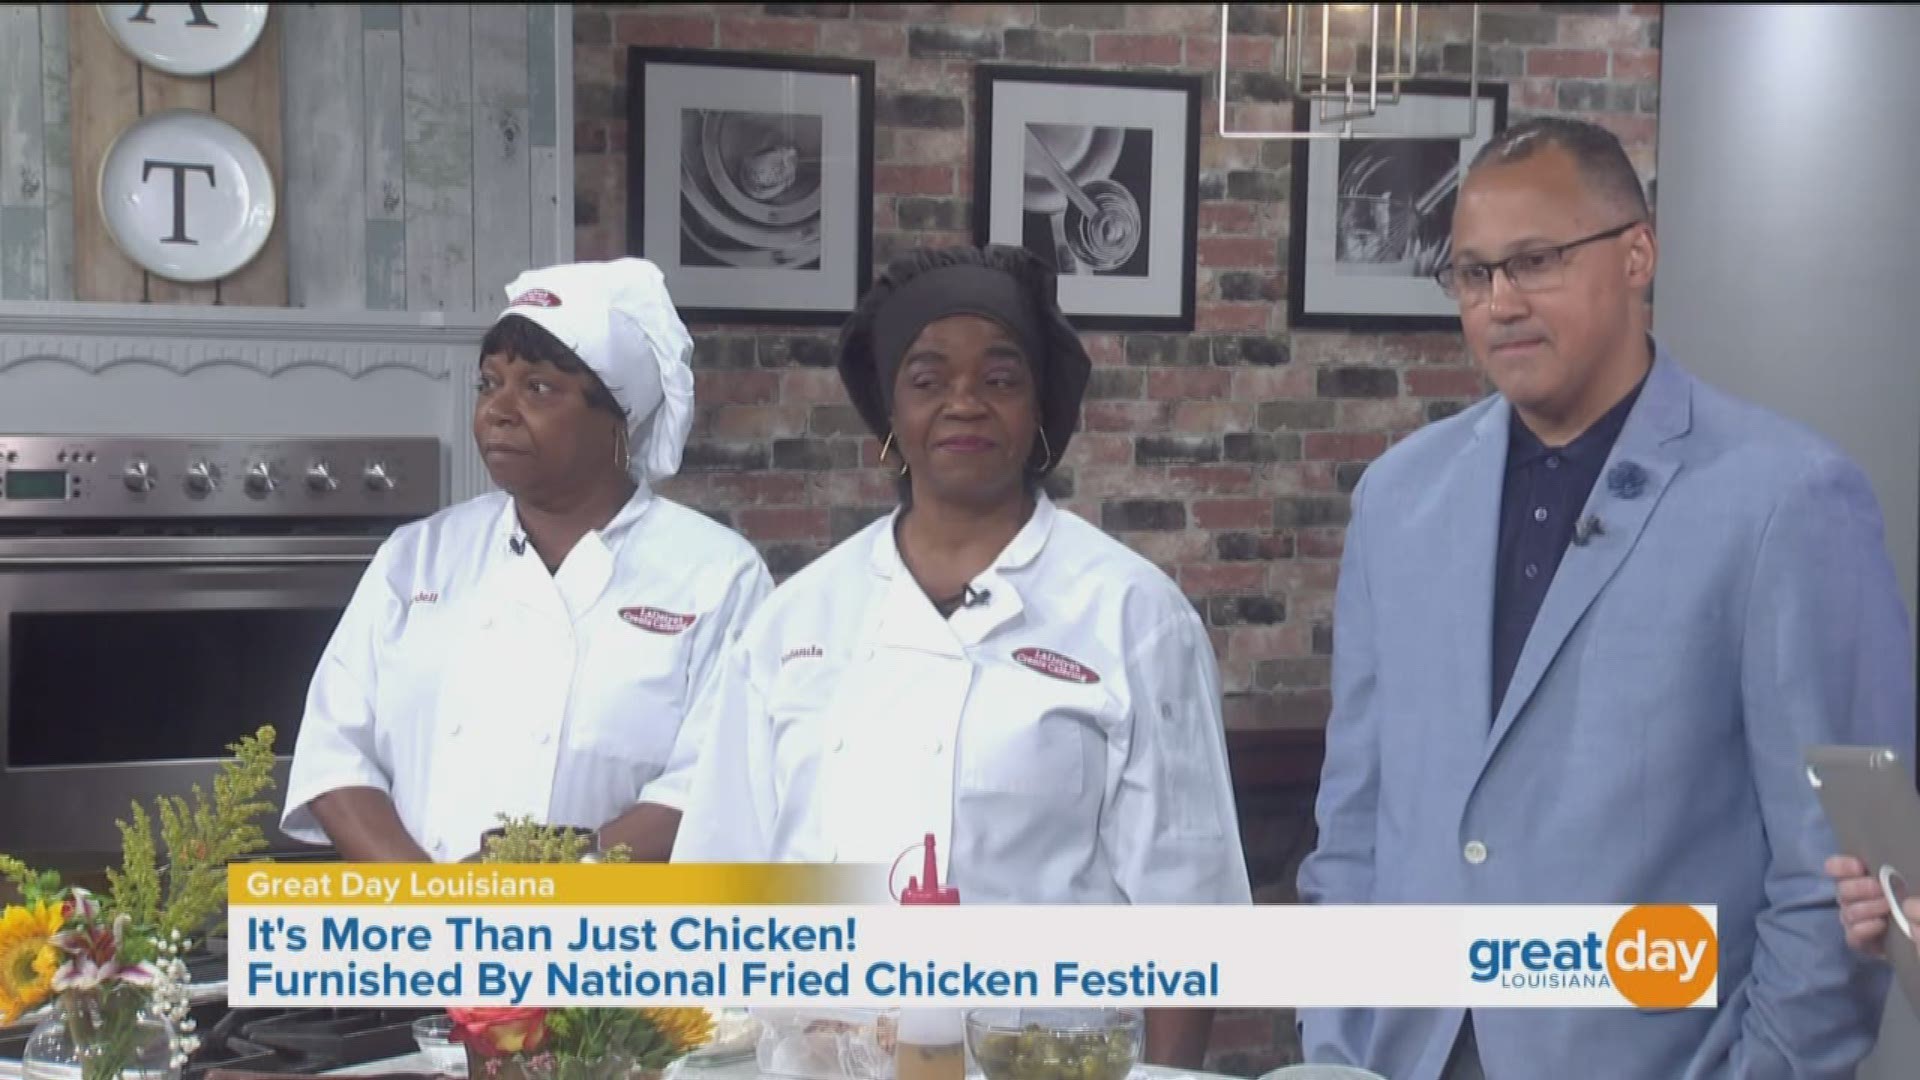 The National Fried Chicken Festival is happening Friday, September 20-Sunday September 22 at Woldenberg Park. VP of Community Development Banking with Capital One Mark Boucree joins owner of LaDelyo's Creole Catering Yolanda Carter to give us the inside scoop on the festival.